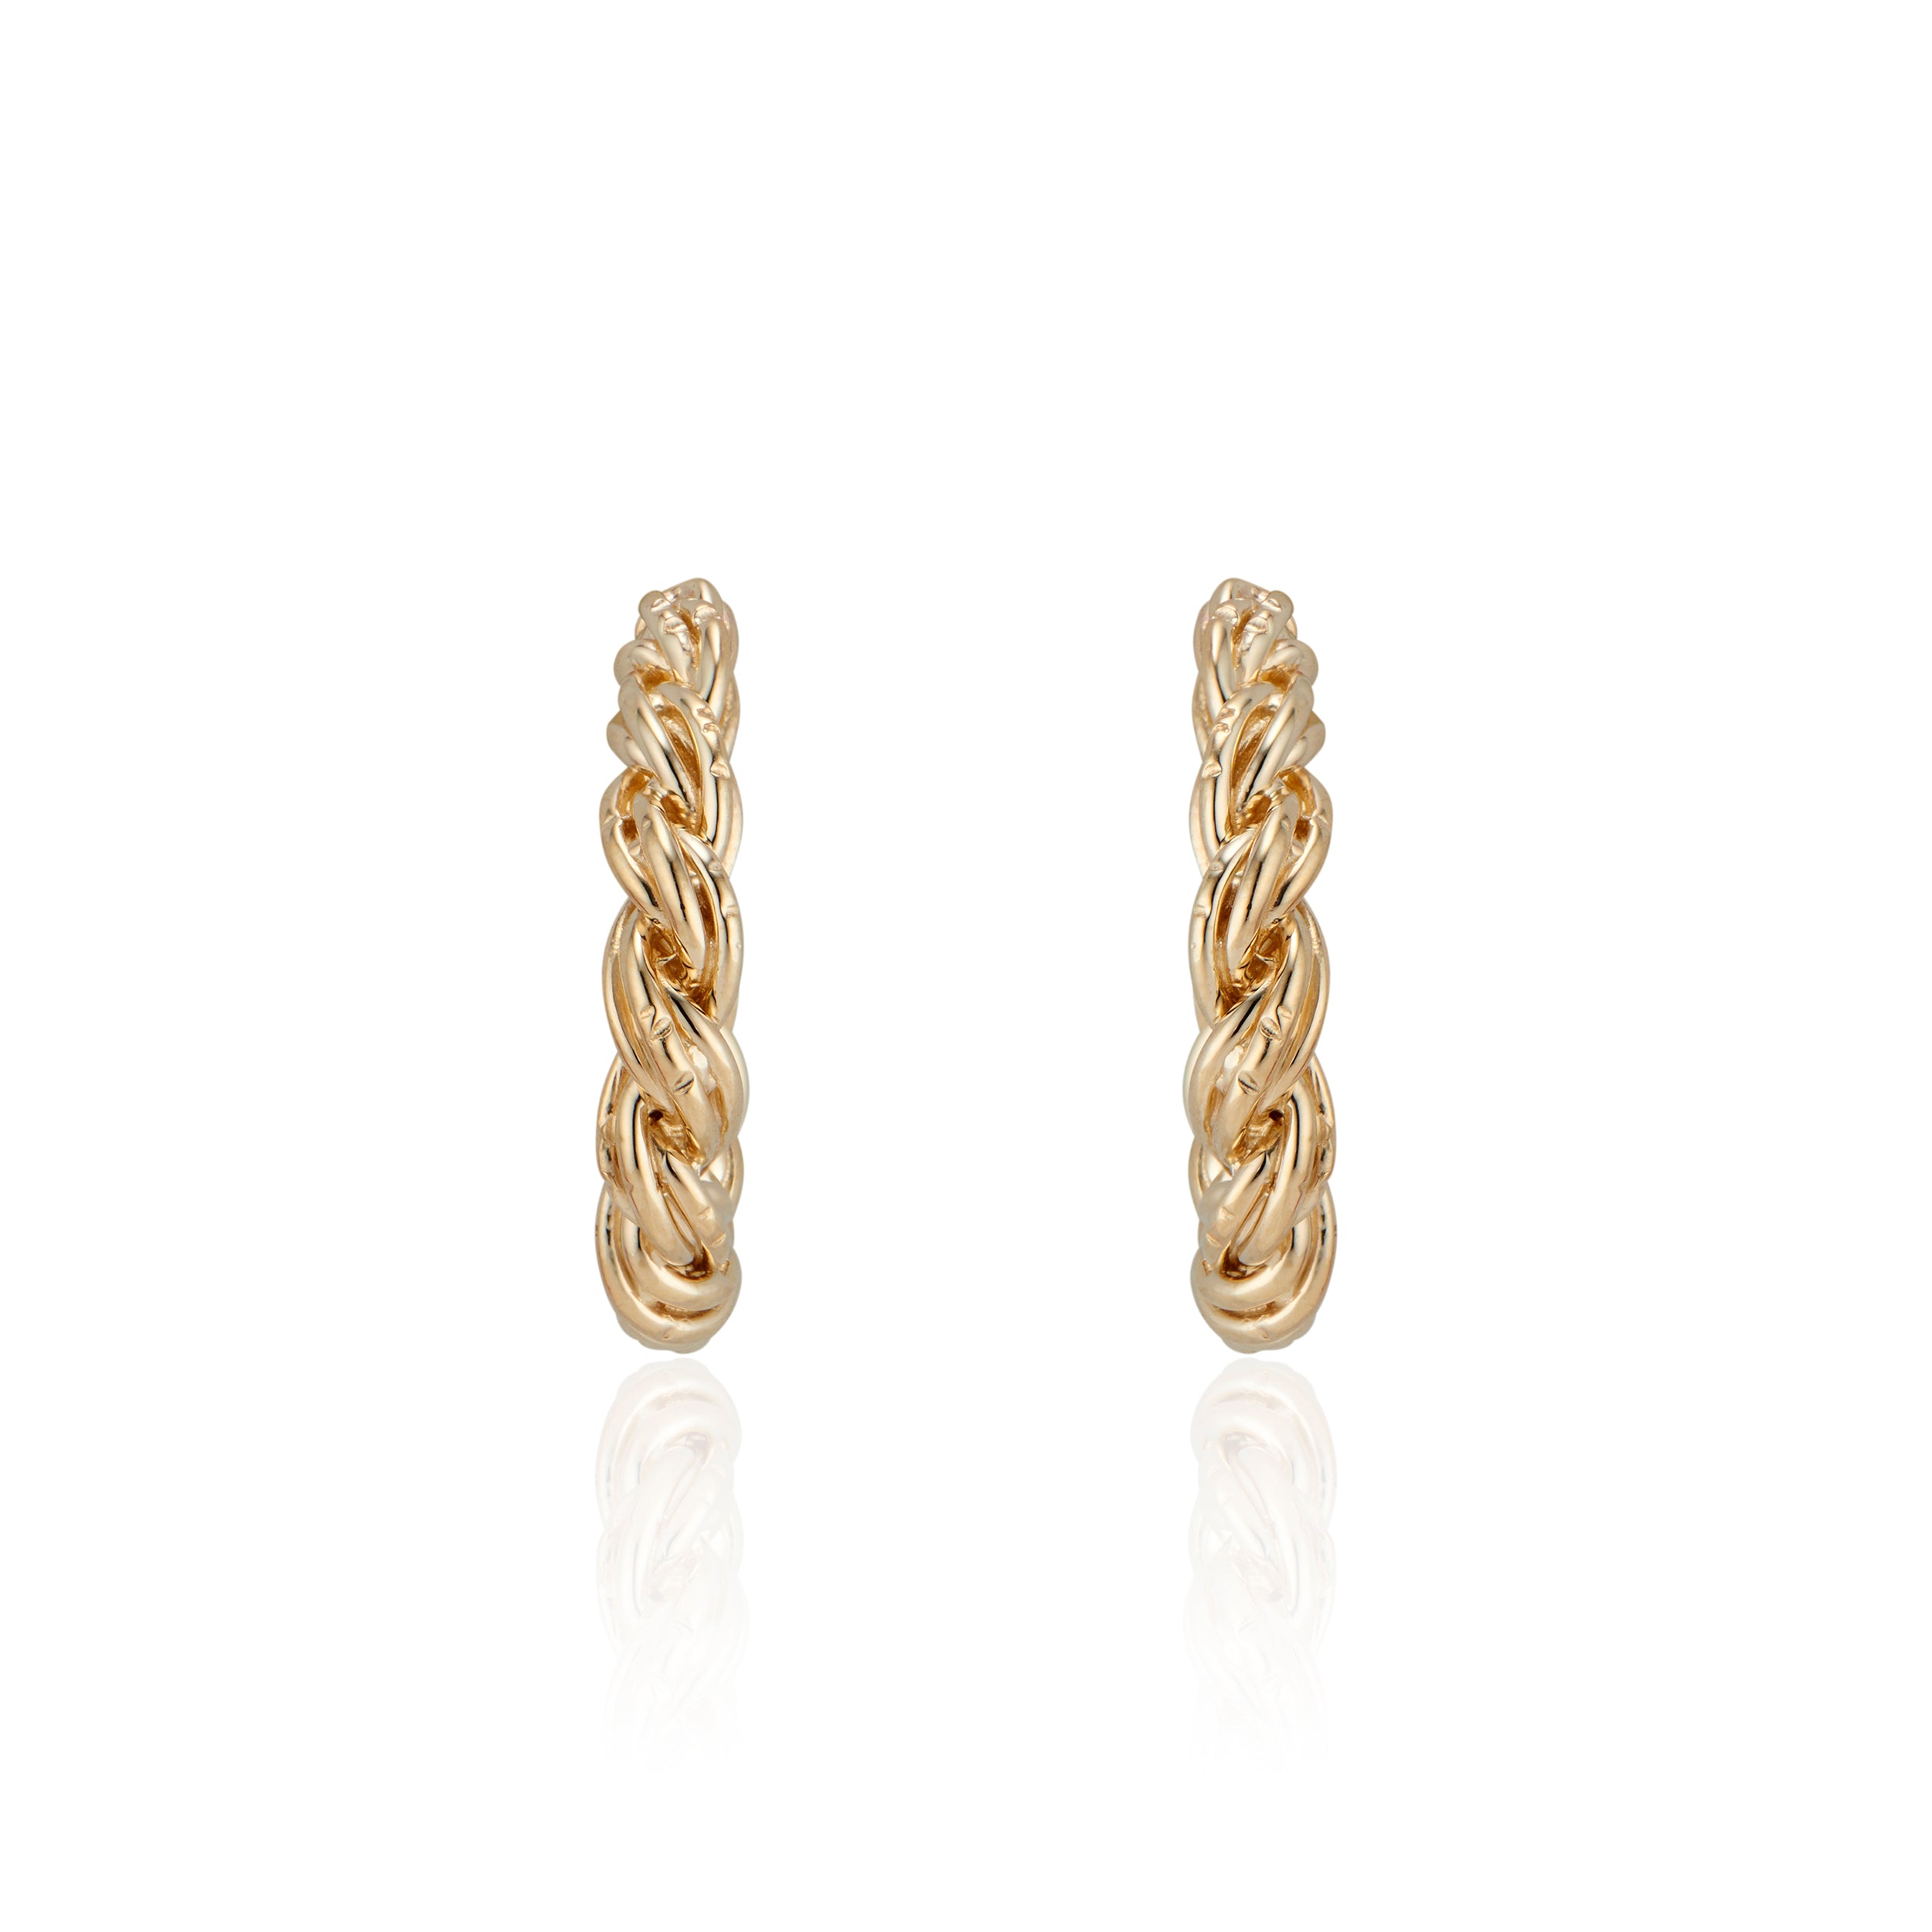 These solid 14K Yellow Zeppelin Gold Hoops feature 14k Gold posts and earnuts and are safe for sensitive ears. Their twisted design gives them the appearance of being heavy, while actually being lightweight. In true Natalie McMillan fashion, there are tiny etching details throughout. 